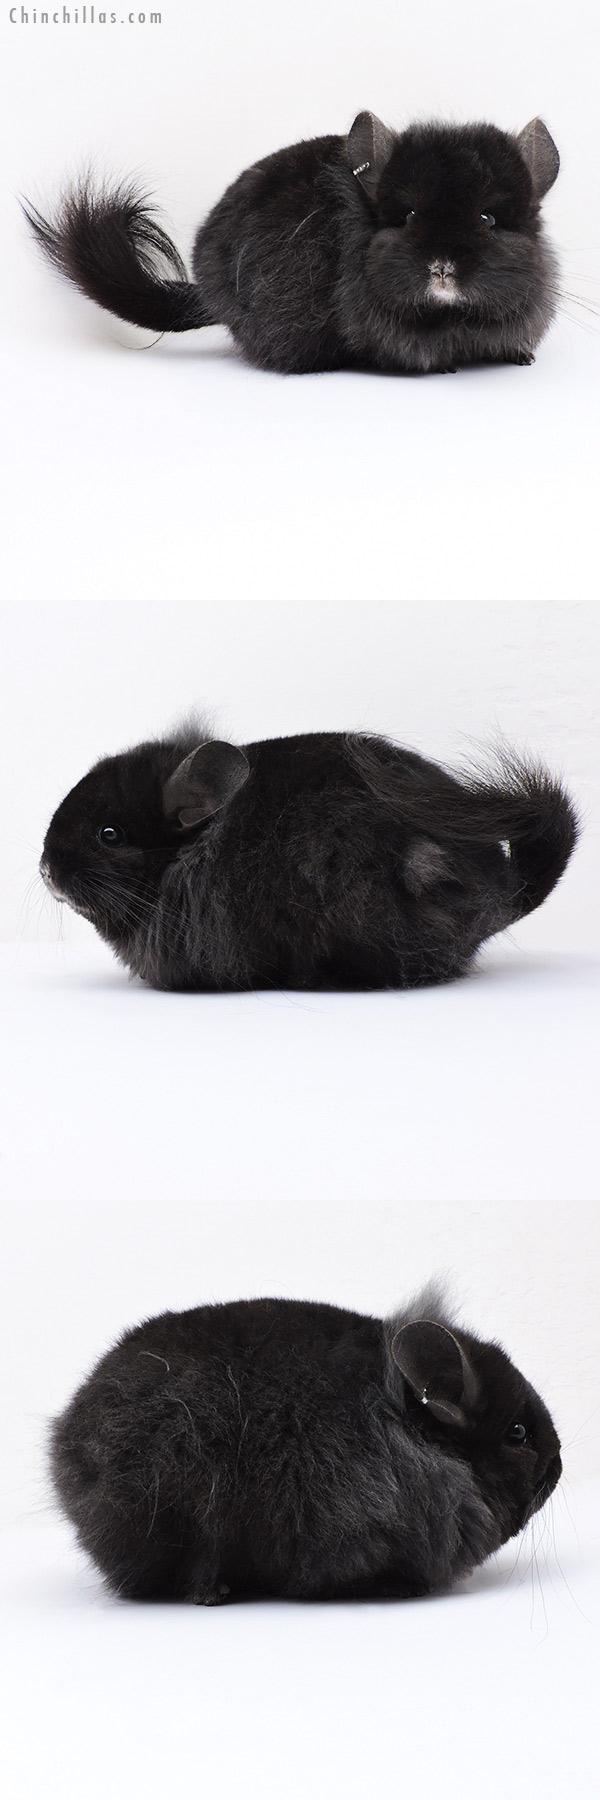 Chinchilla or related item offered for sale or export on Chinchillas.com - 18324 Exceptional Blocky Brevi Type Ebony  Royal Persian Angora ( Locken Carrier ) Female Chinchilla